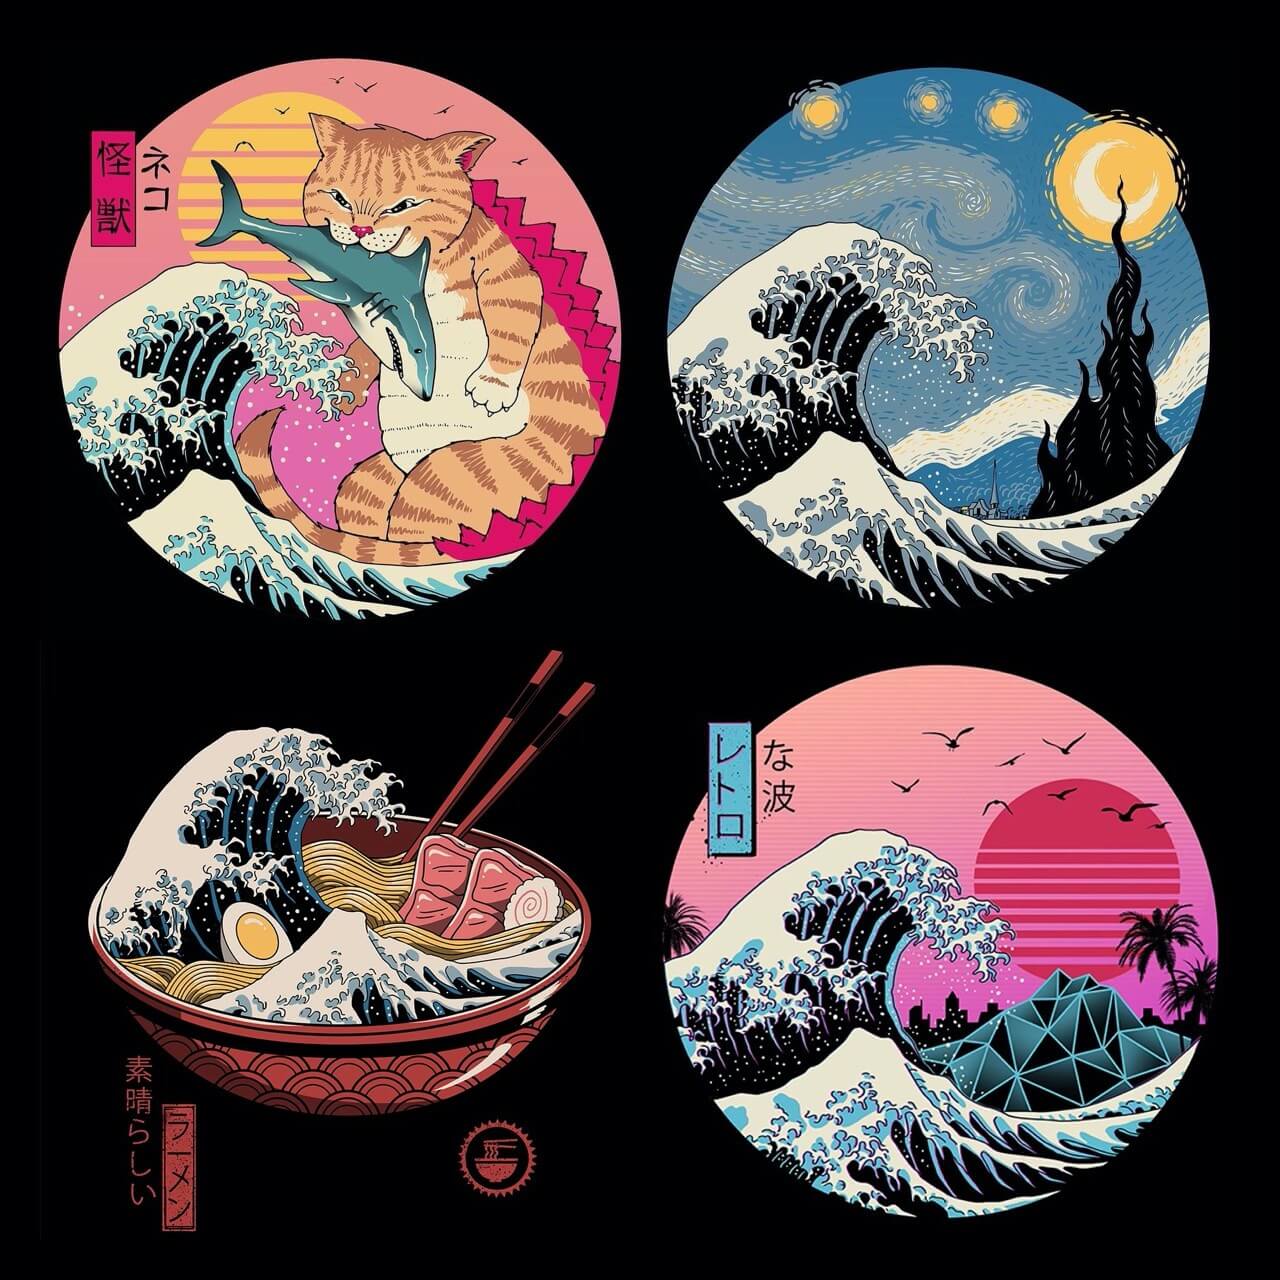 The Great Wave off Kanagawa reimagined by Vincent Trinidad